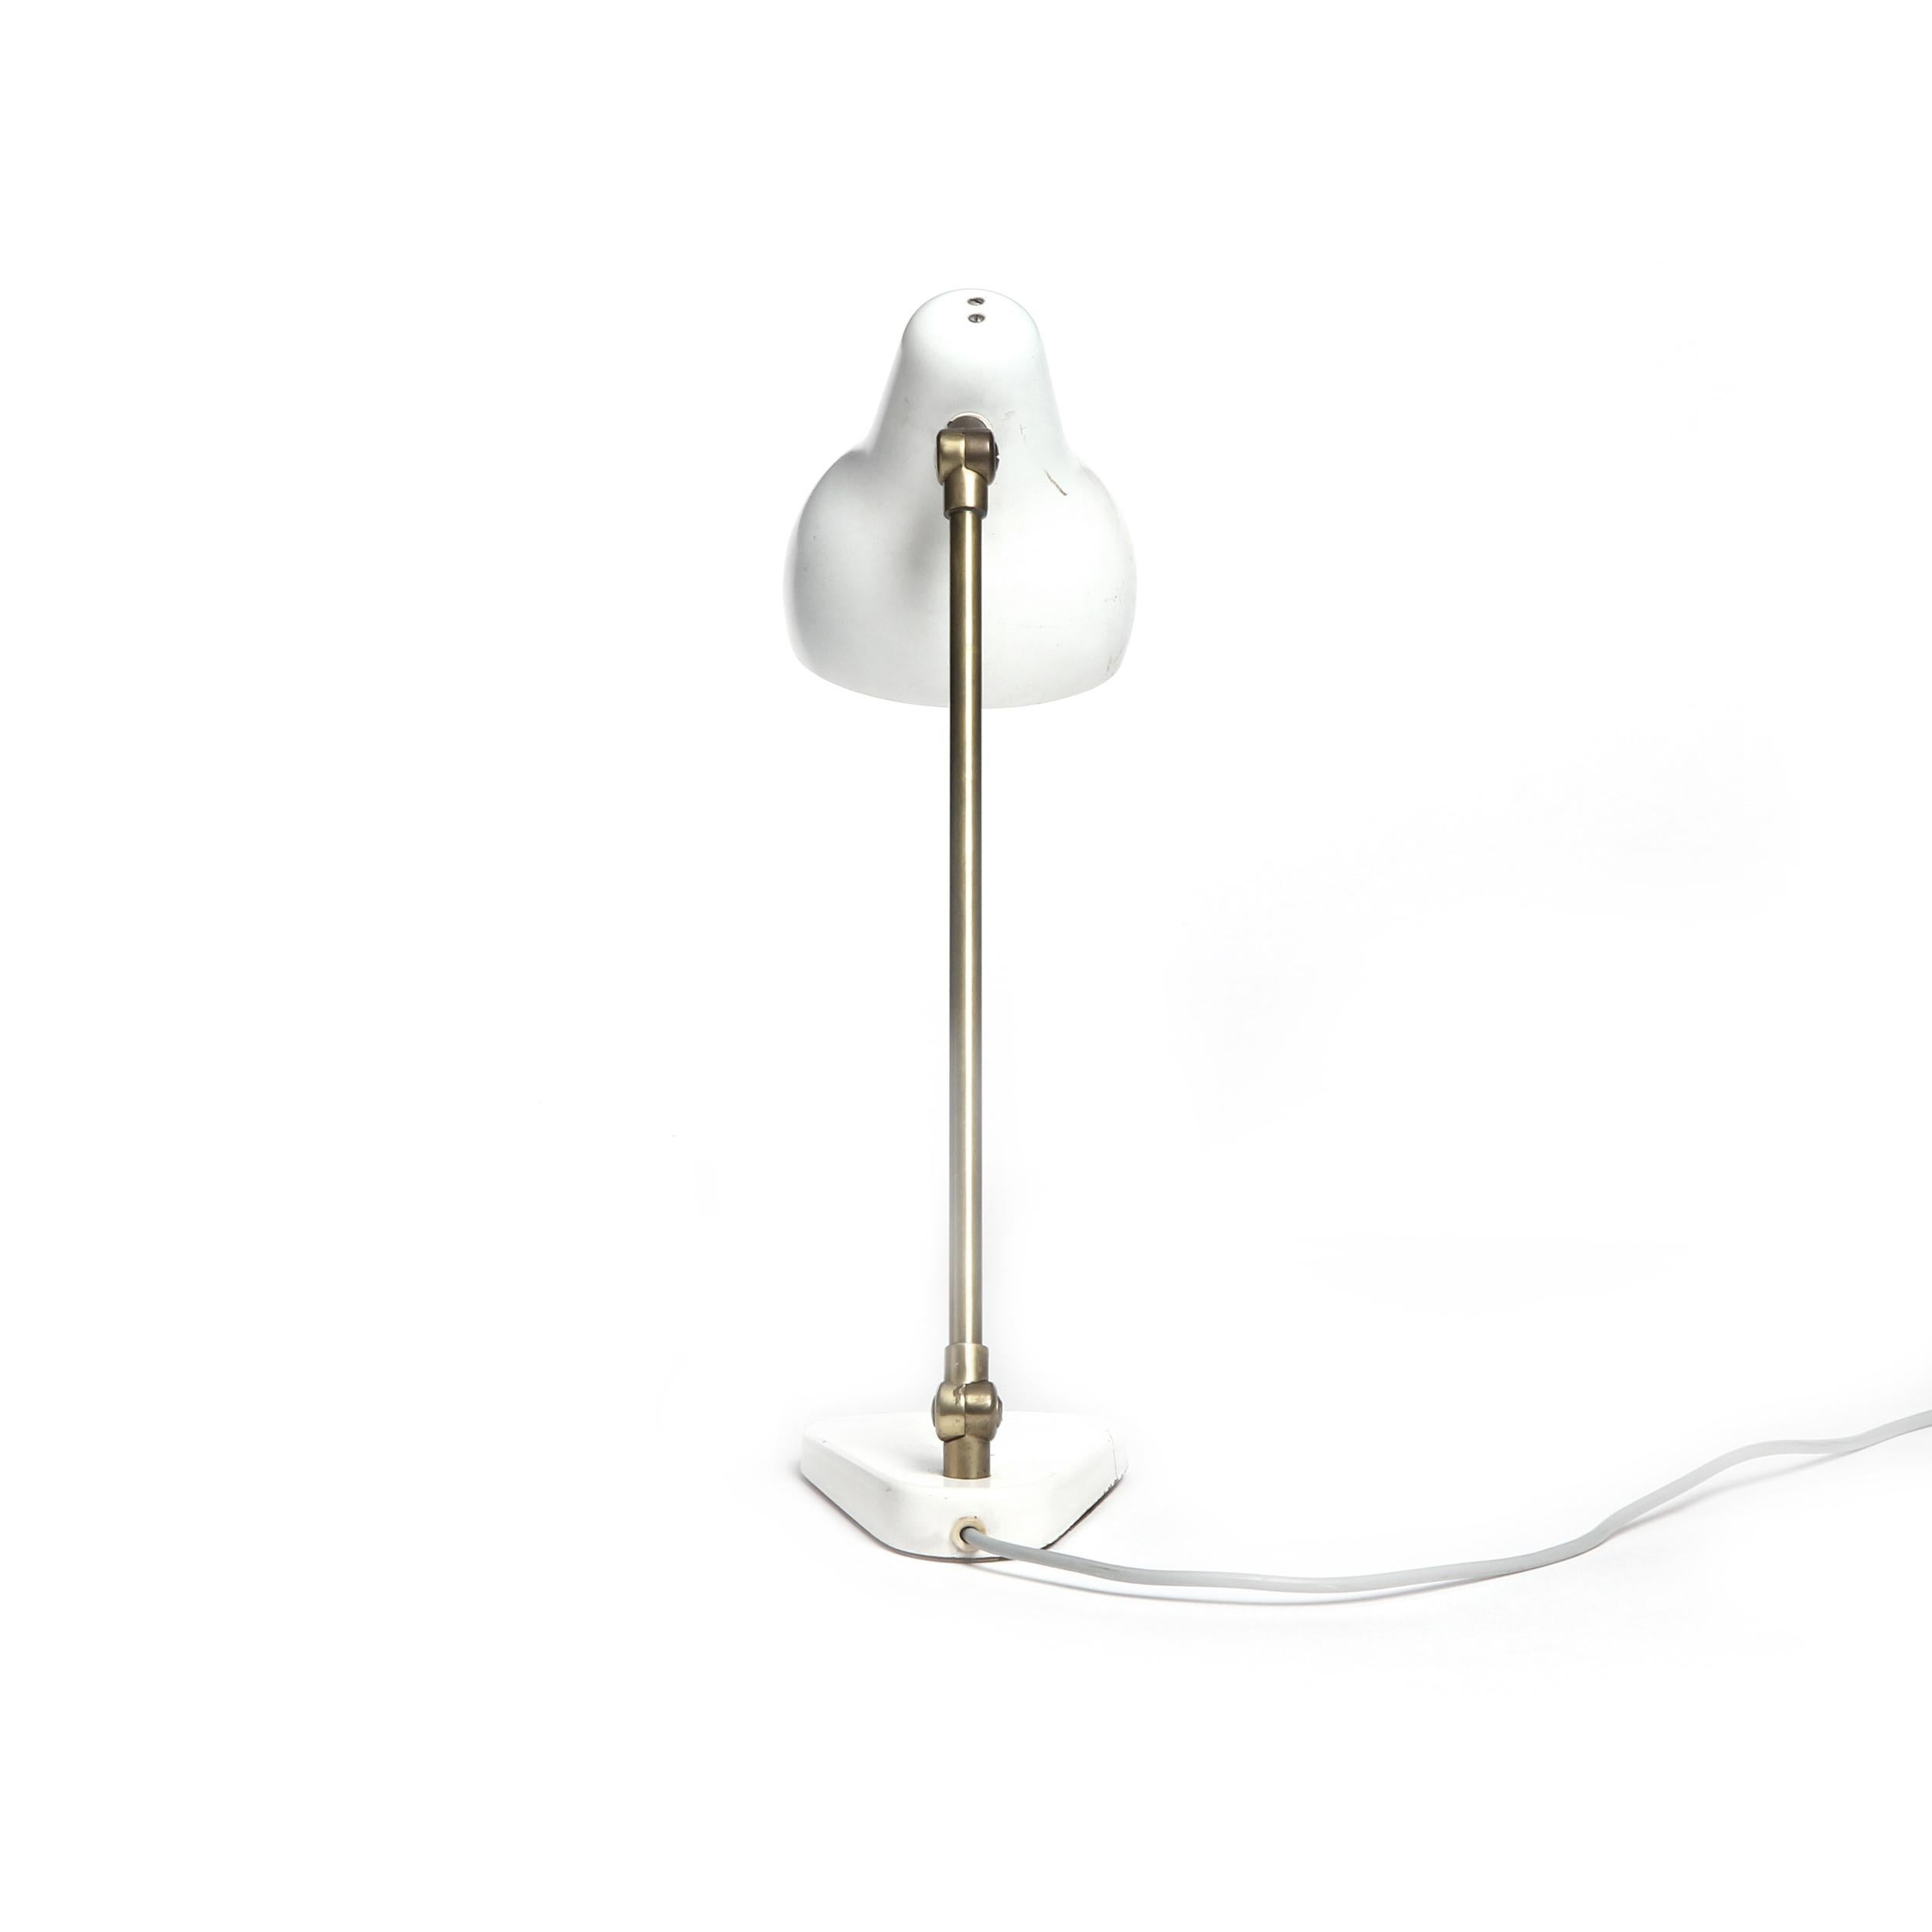 An articulating desk lamp having a brass stem with patina and off-white enameled hood and base.